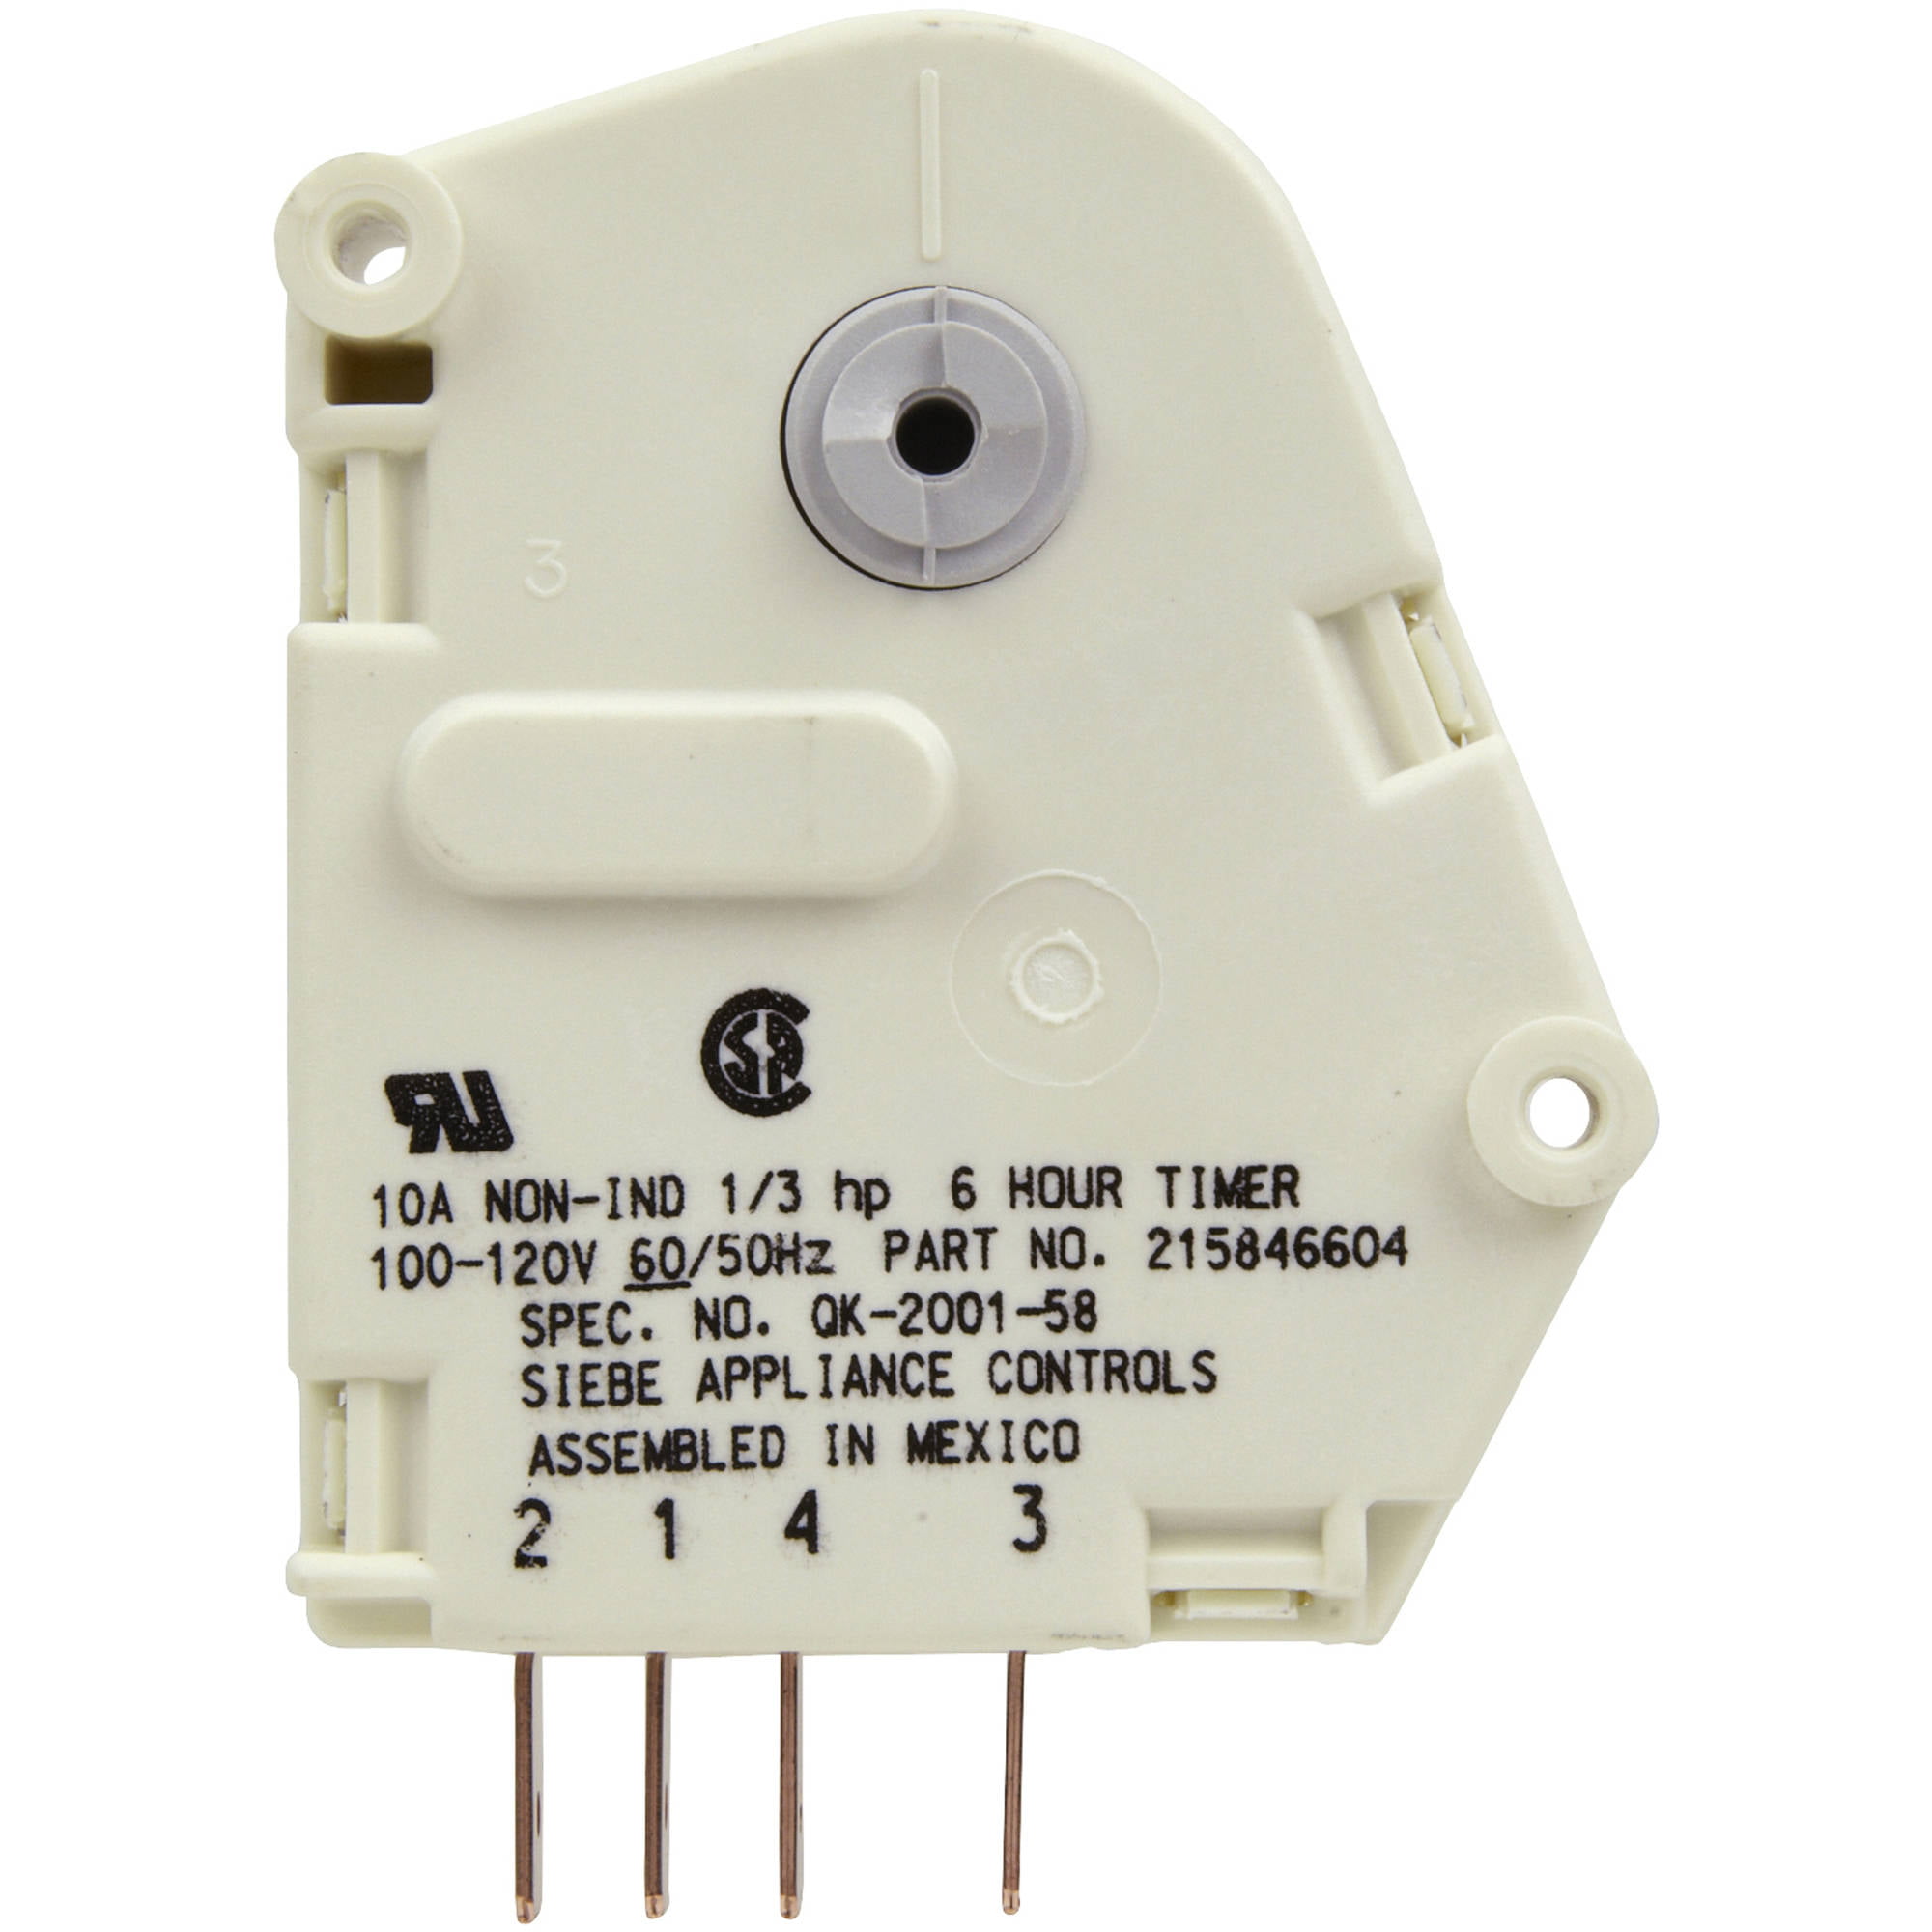 4391974 PS373019 AP3109443 Refrigerator Defrost Timer for Maytag Magic Chef